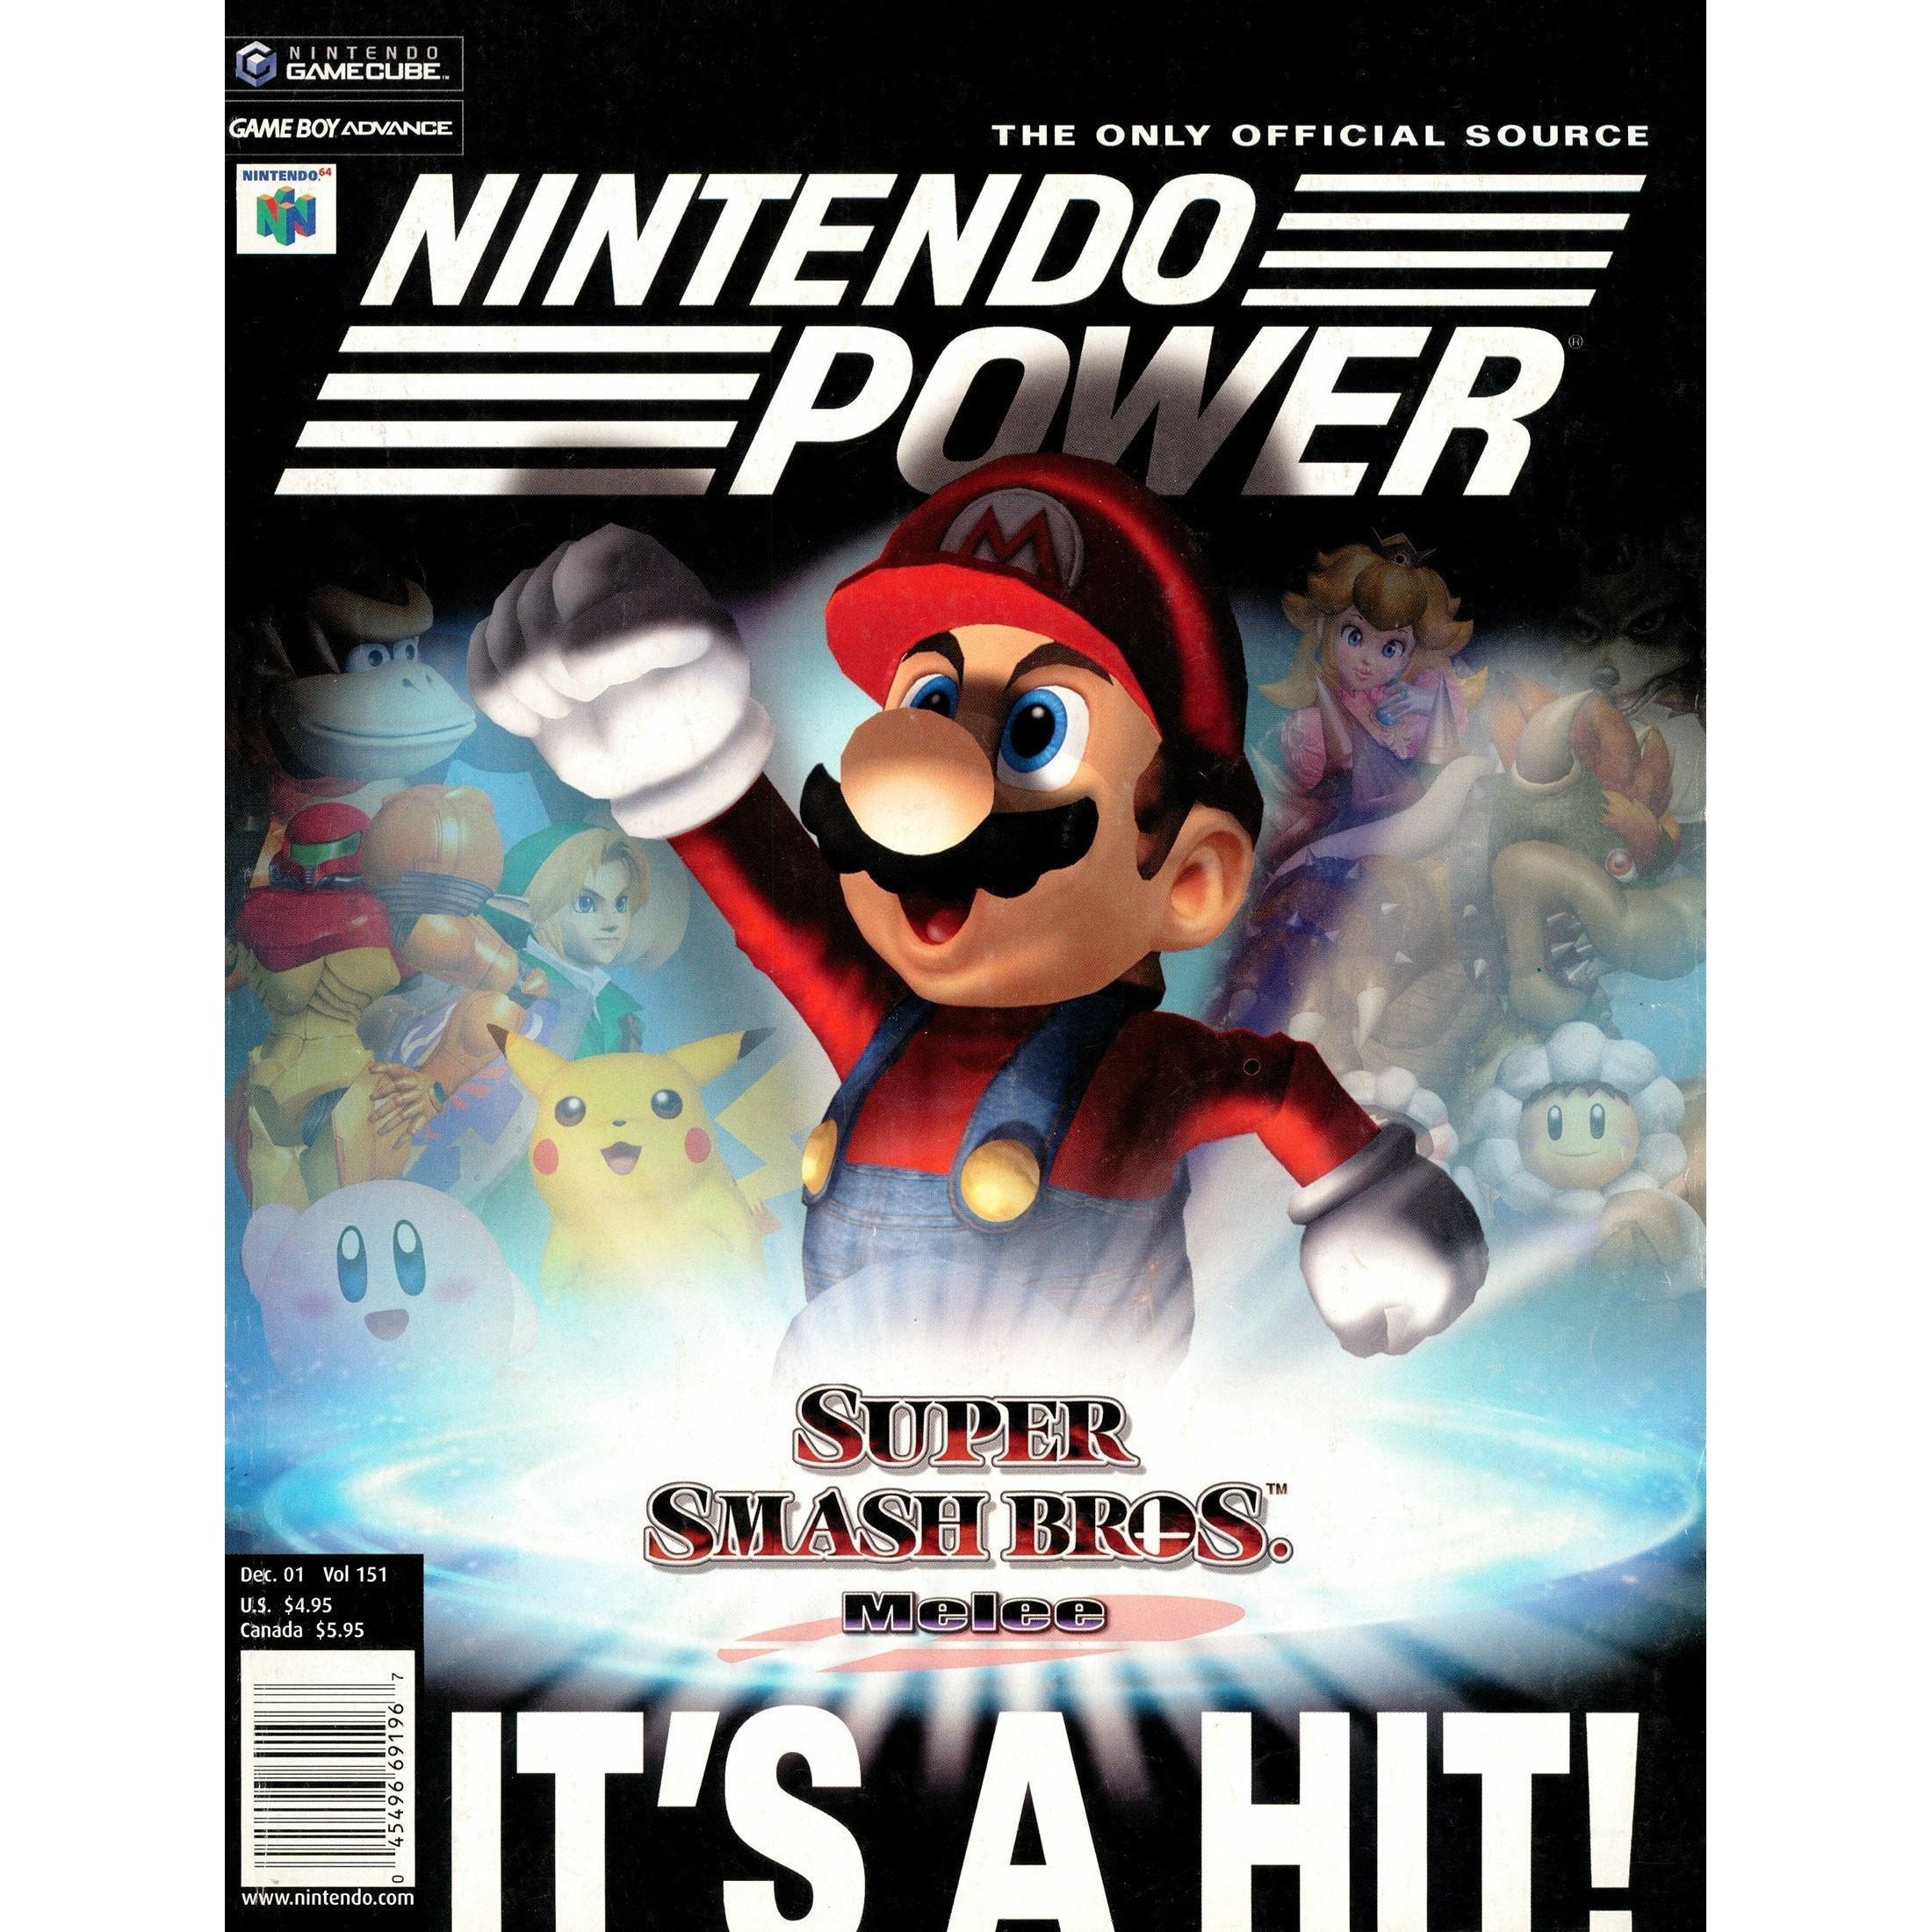 Nintendo Power Magazine (#151) - Complete and/or Good Condition